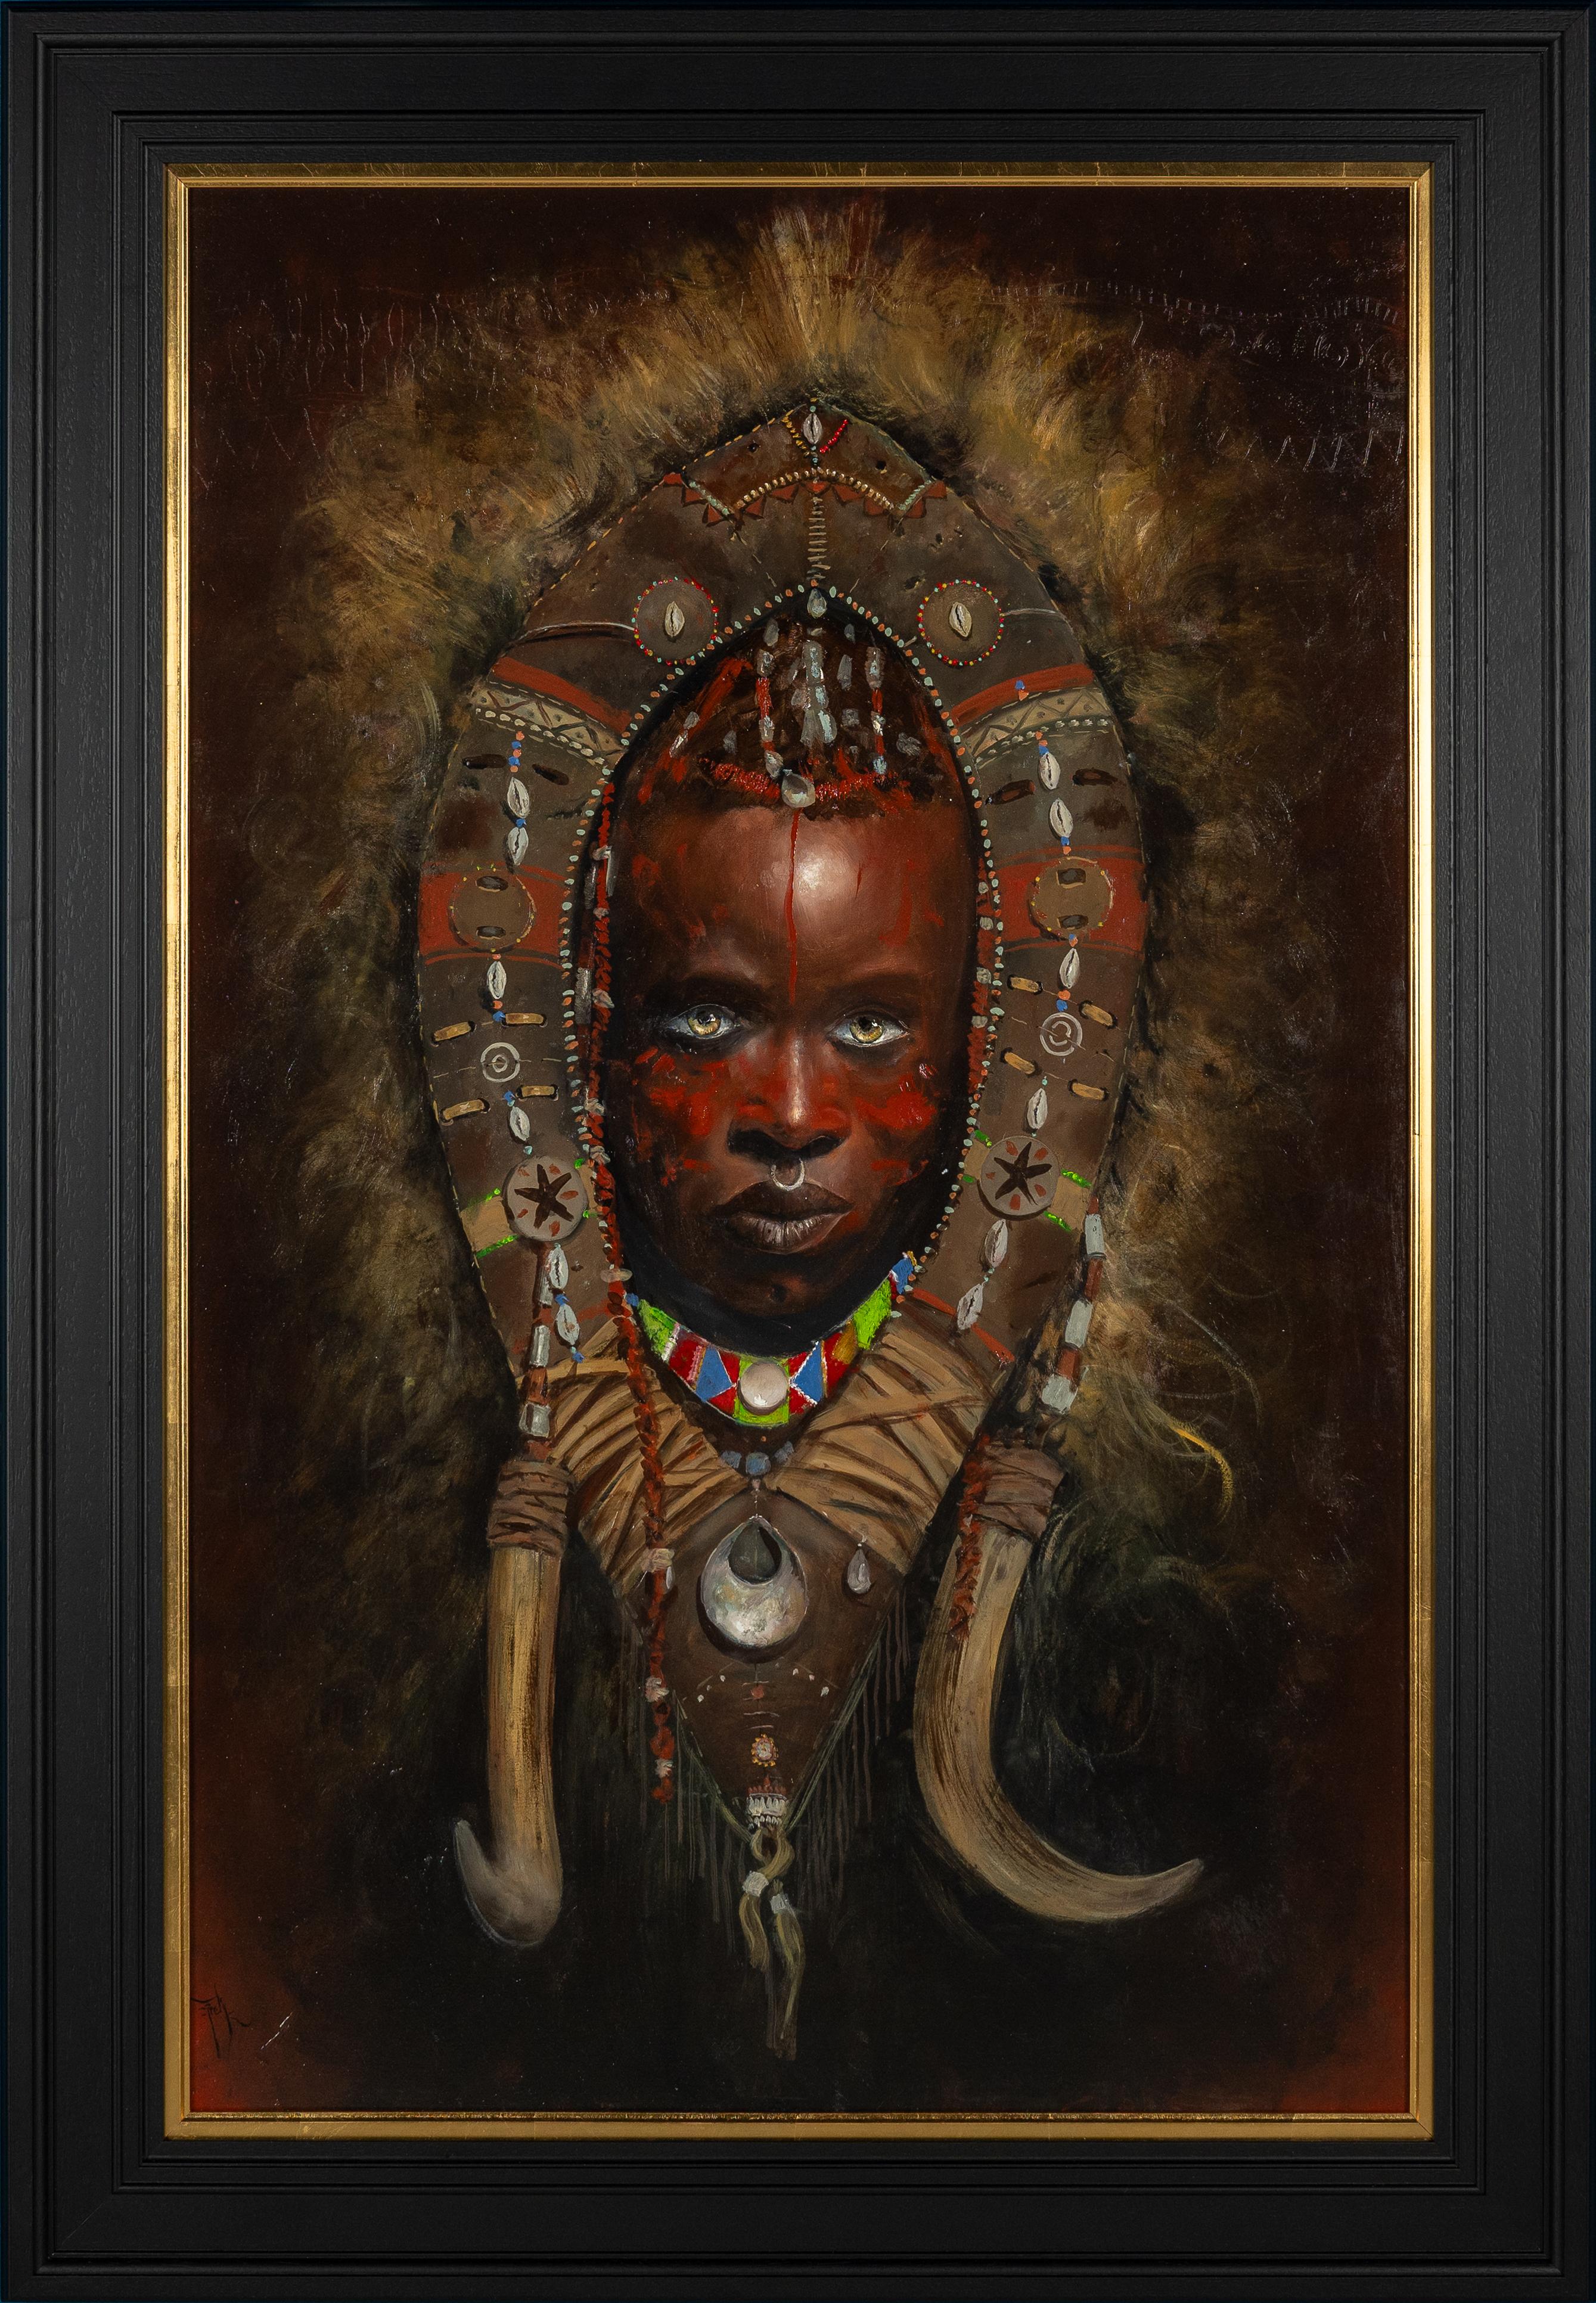 'Shujaa' Contemporary African Tribal portrait of a woman wearing a head dress - Painting by Ignacio Trelis 